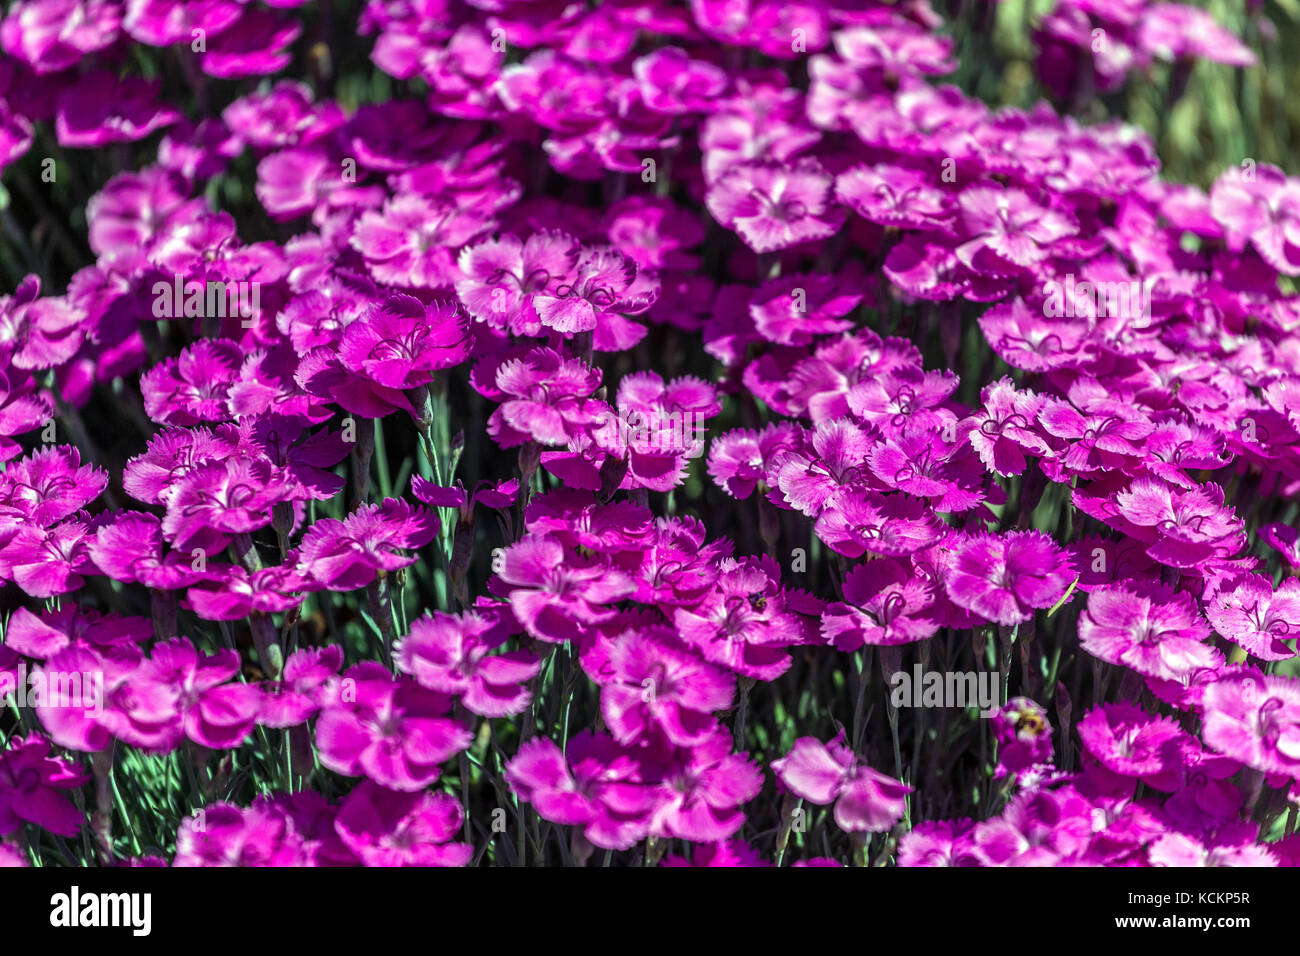 Deep Pink Cheddar Dianthus 'Whatfield Magenta' Violet Purple Flowers Ground cover Growing Blooms Flowering Alpine Plant Rockery Garden Dry Place Stock Photo